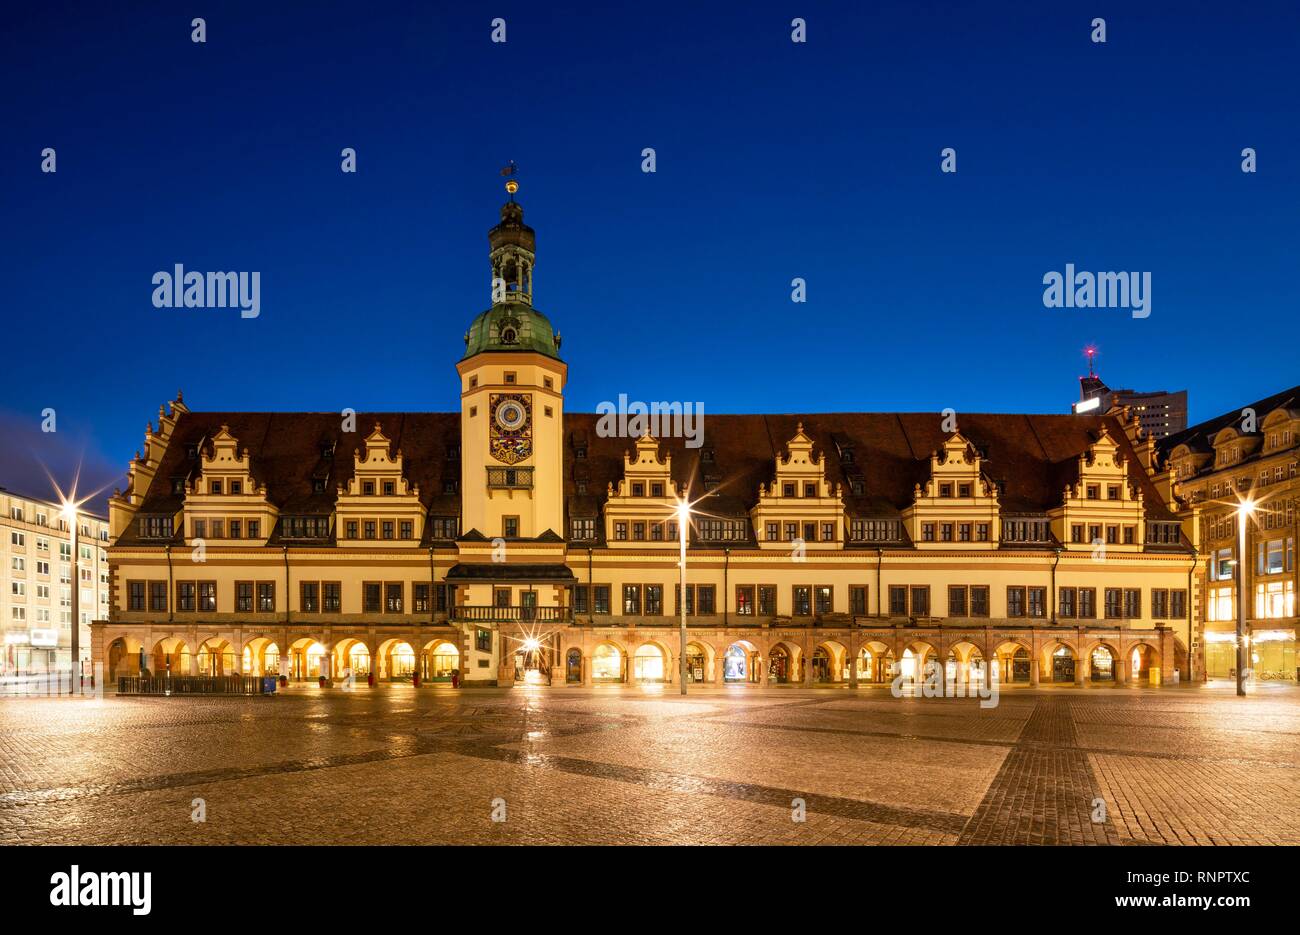 Old Town Hall, City History Museum, Market Square, Night Picture, Leipzig, Saxony, Germany Stock Photo